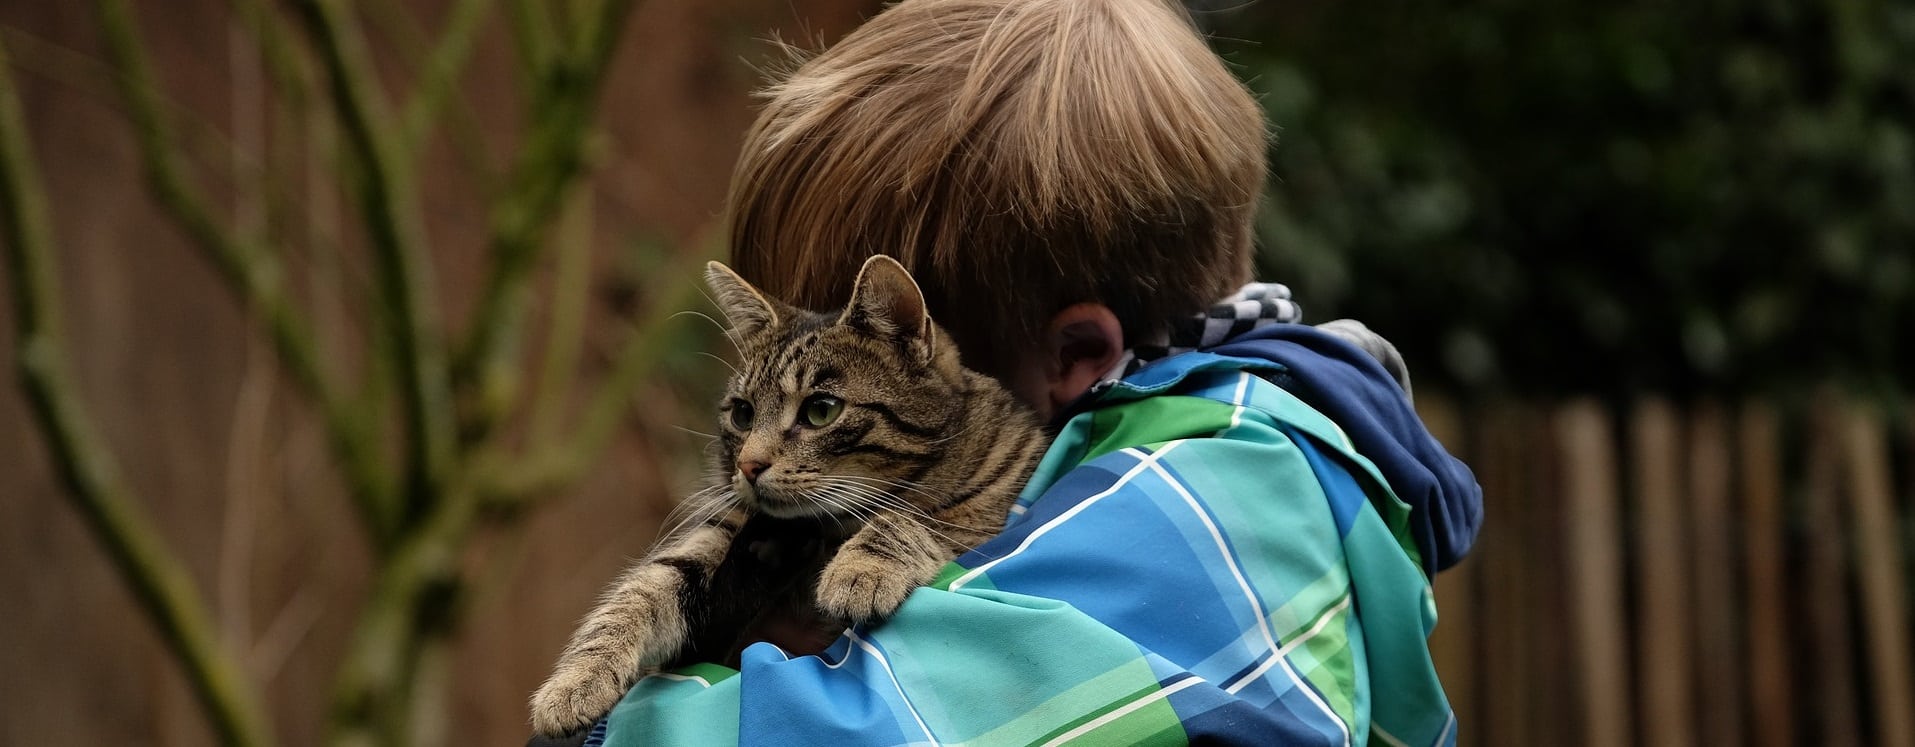 AAI Research: Cats and Children with Autism